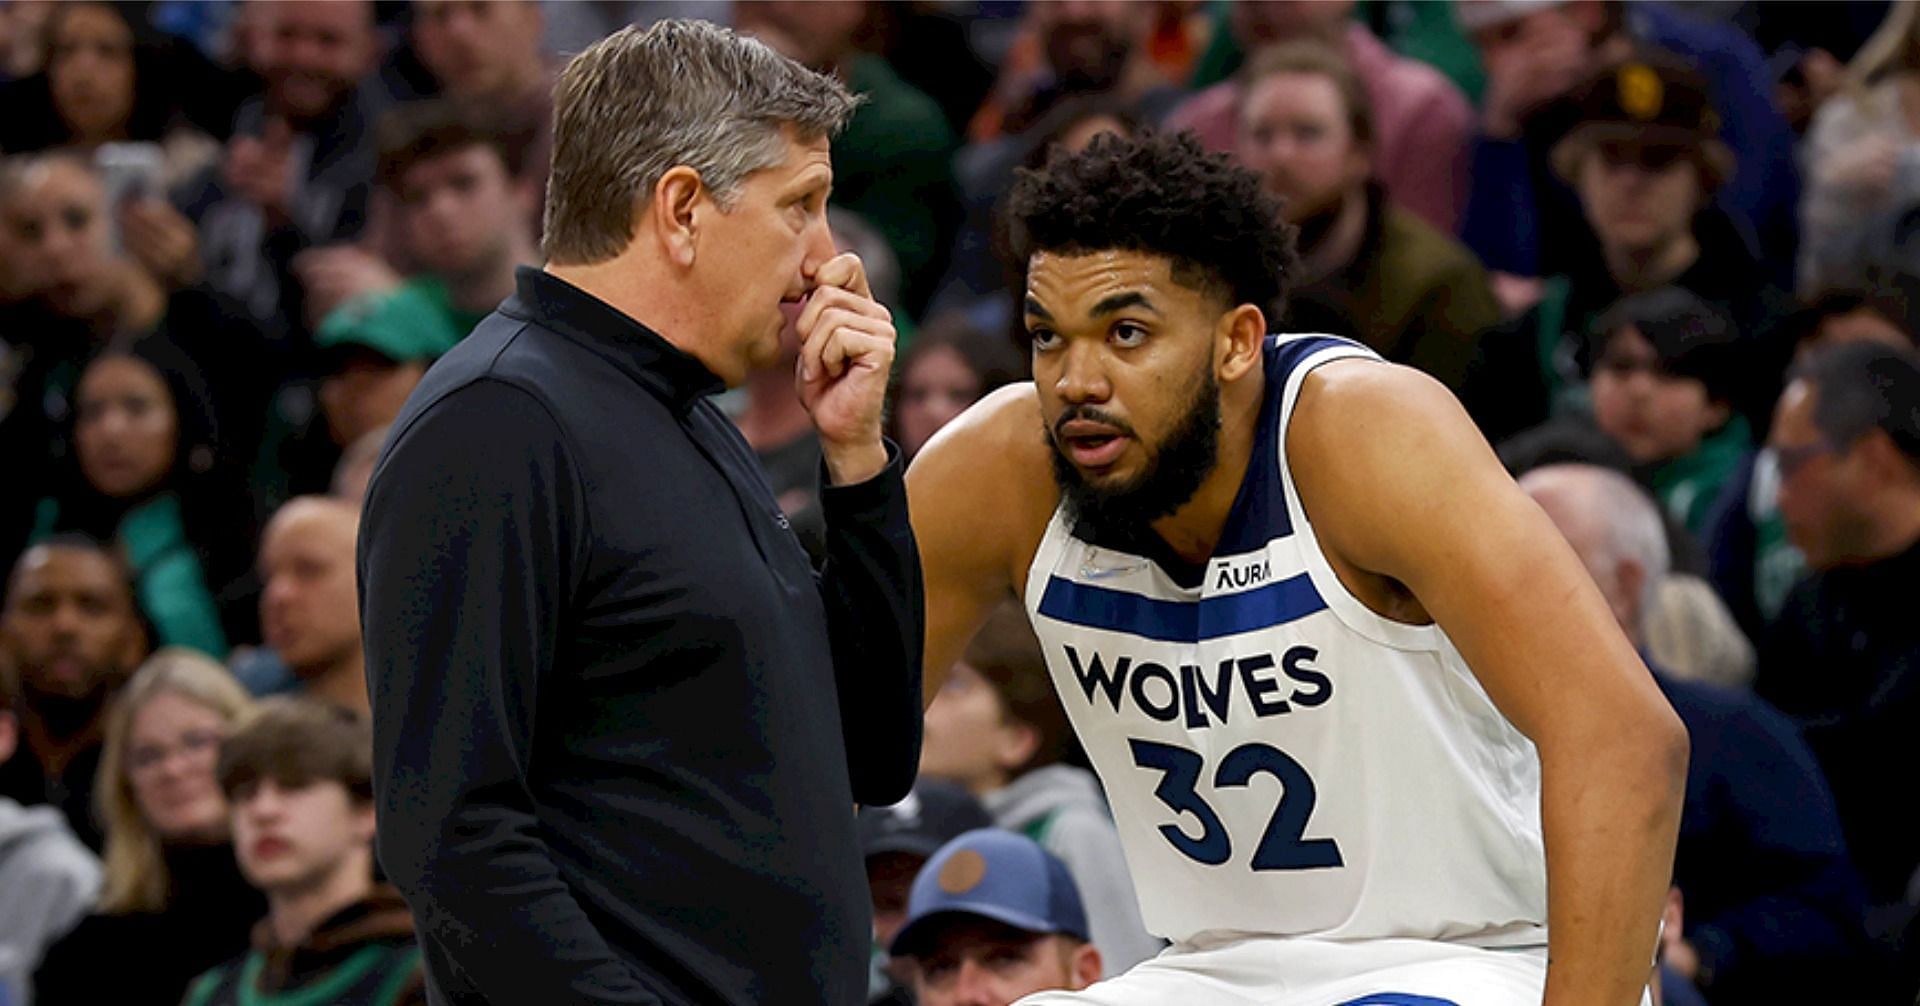 Minnesota Timberwolves coach Chris Finch and Wolves star big man Karl-Anthony Towns